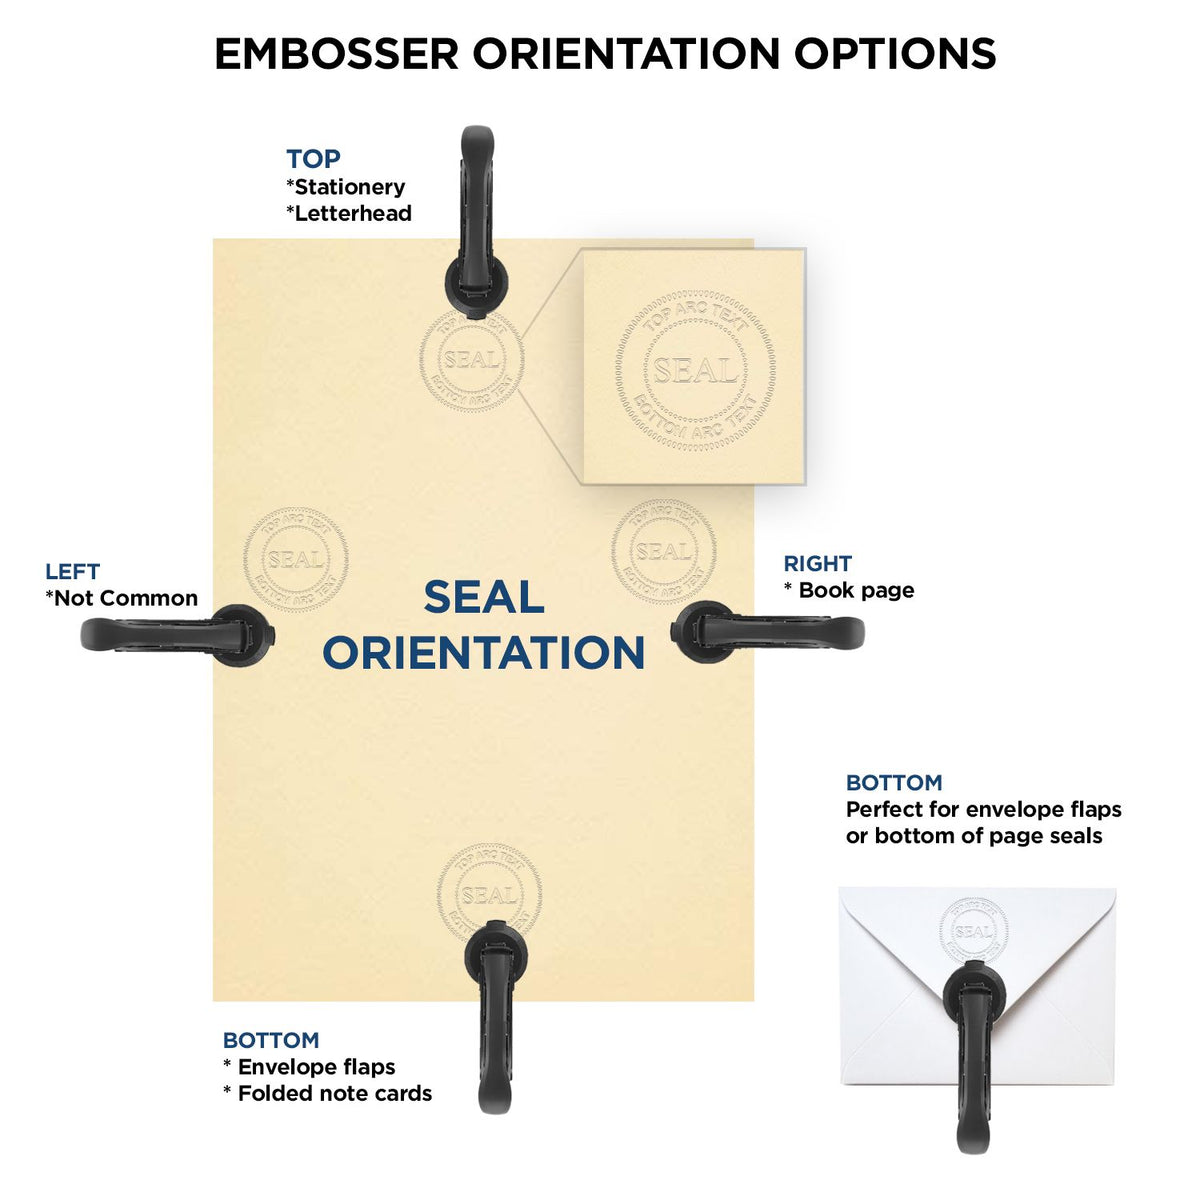 An infographic for the Kansas Geologist Desk Seal showing embosser orientation, this is showing examples of a top, bottom, right and left insert.